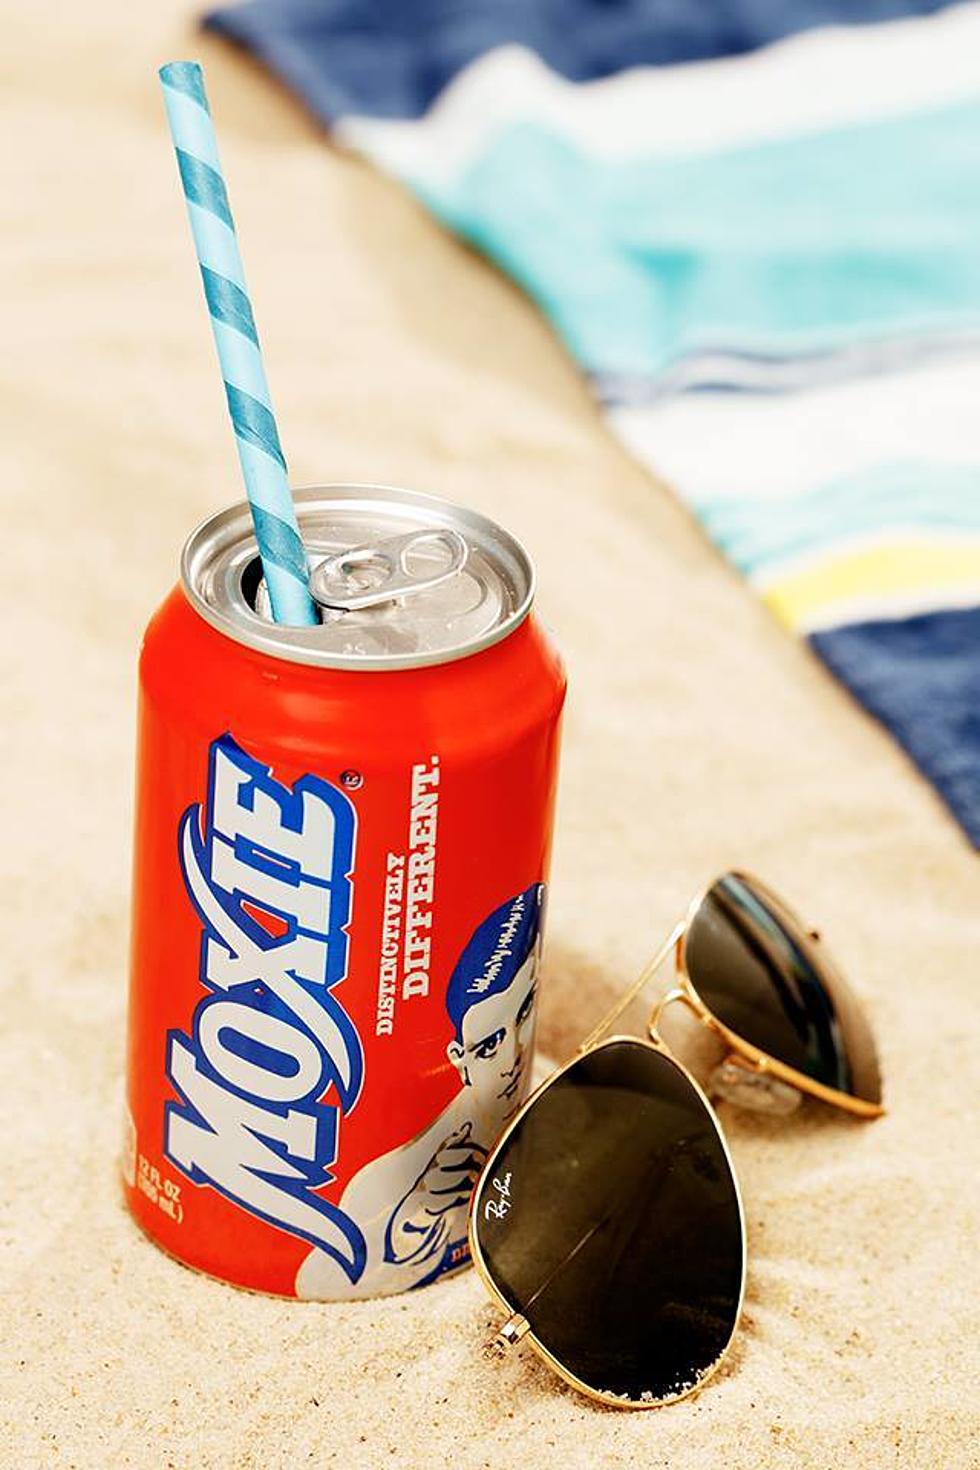 Moxie Glass Drinking Straws: Add some Fun to your Beverages